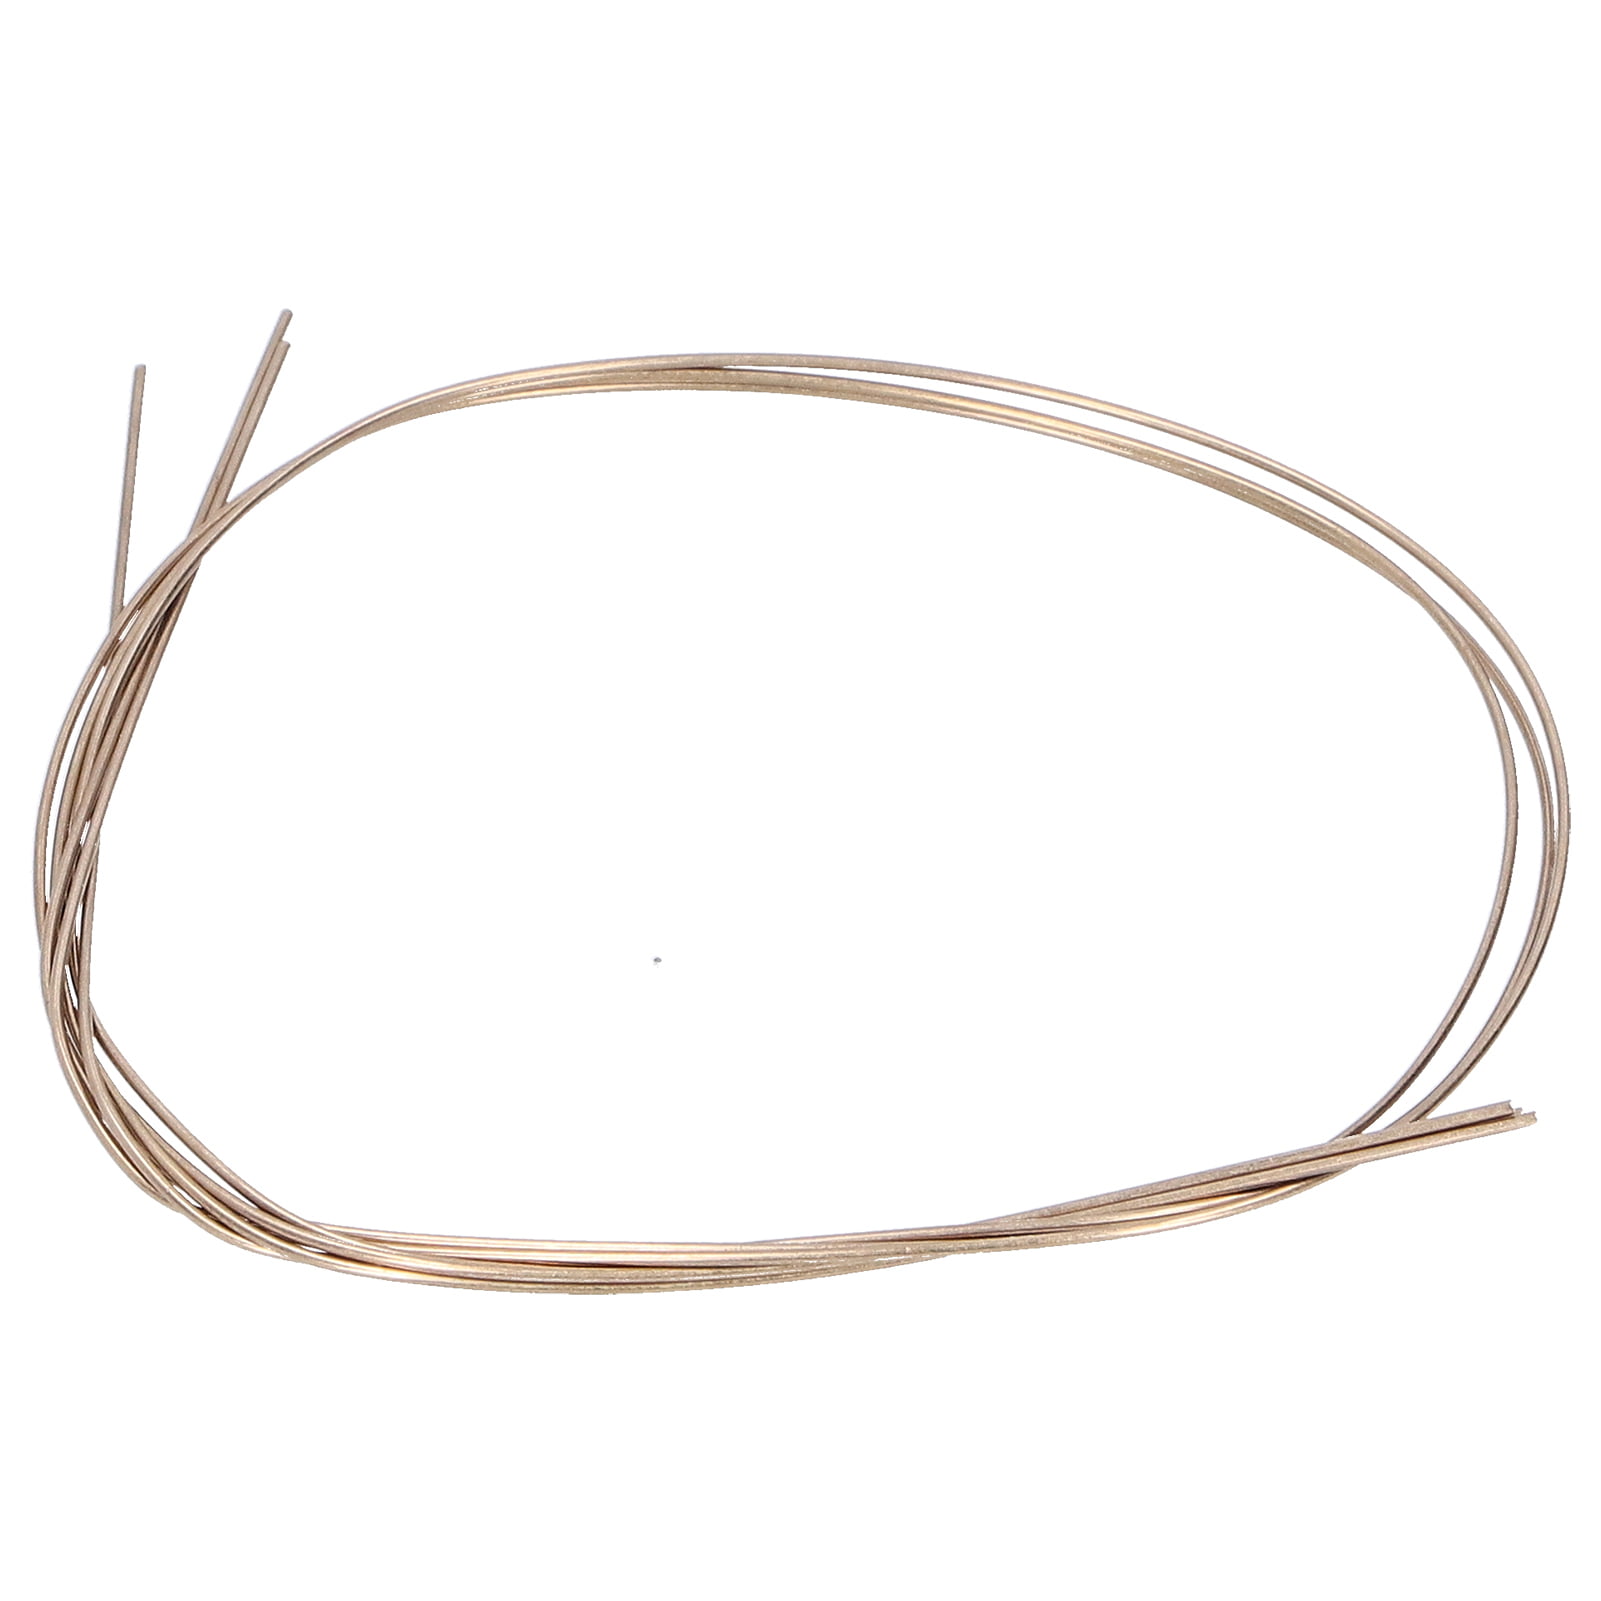 01 Soldering Tool Copper Wire 1.2mm Copper Wire 3Pcs for Jewelry Repairing with Low Melting Point Easy to Melt Jewelry Making Copper Welding Wire 